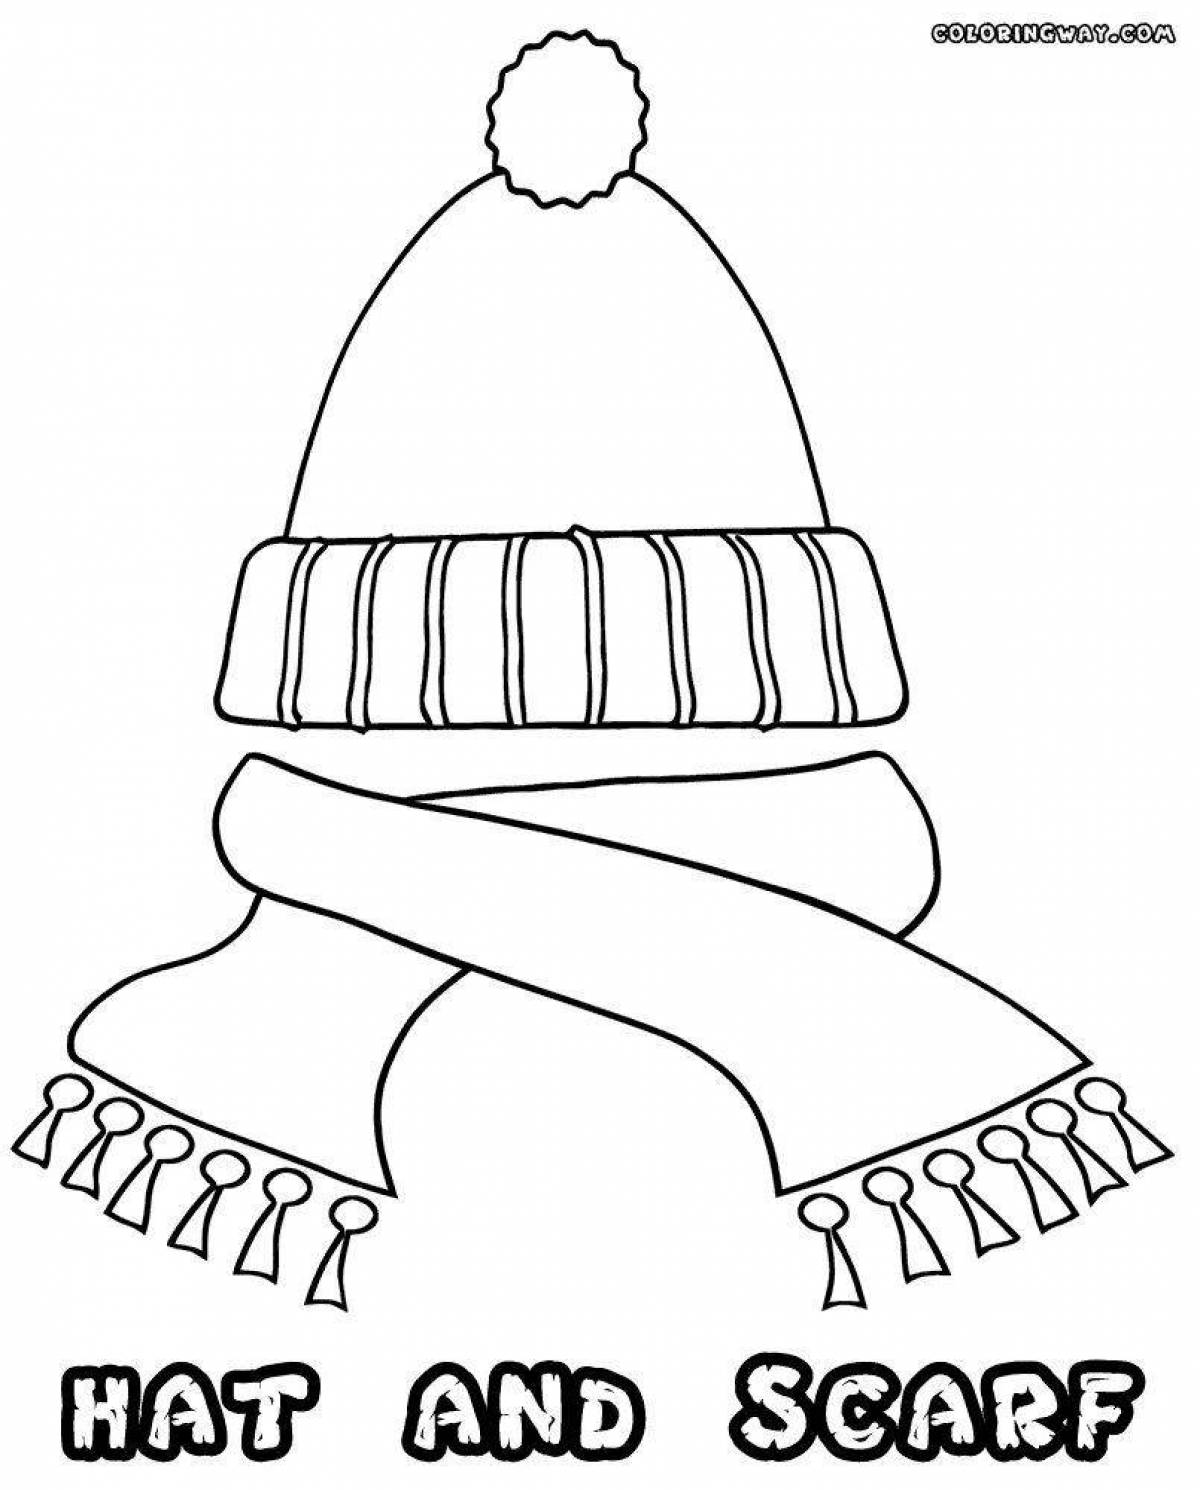 Coloring page colorful hat and scarf